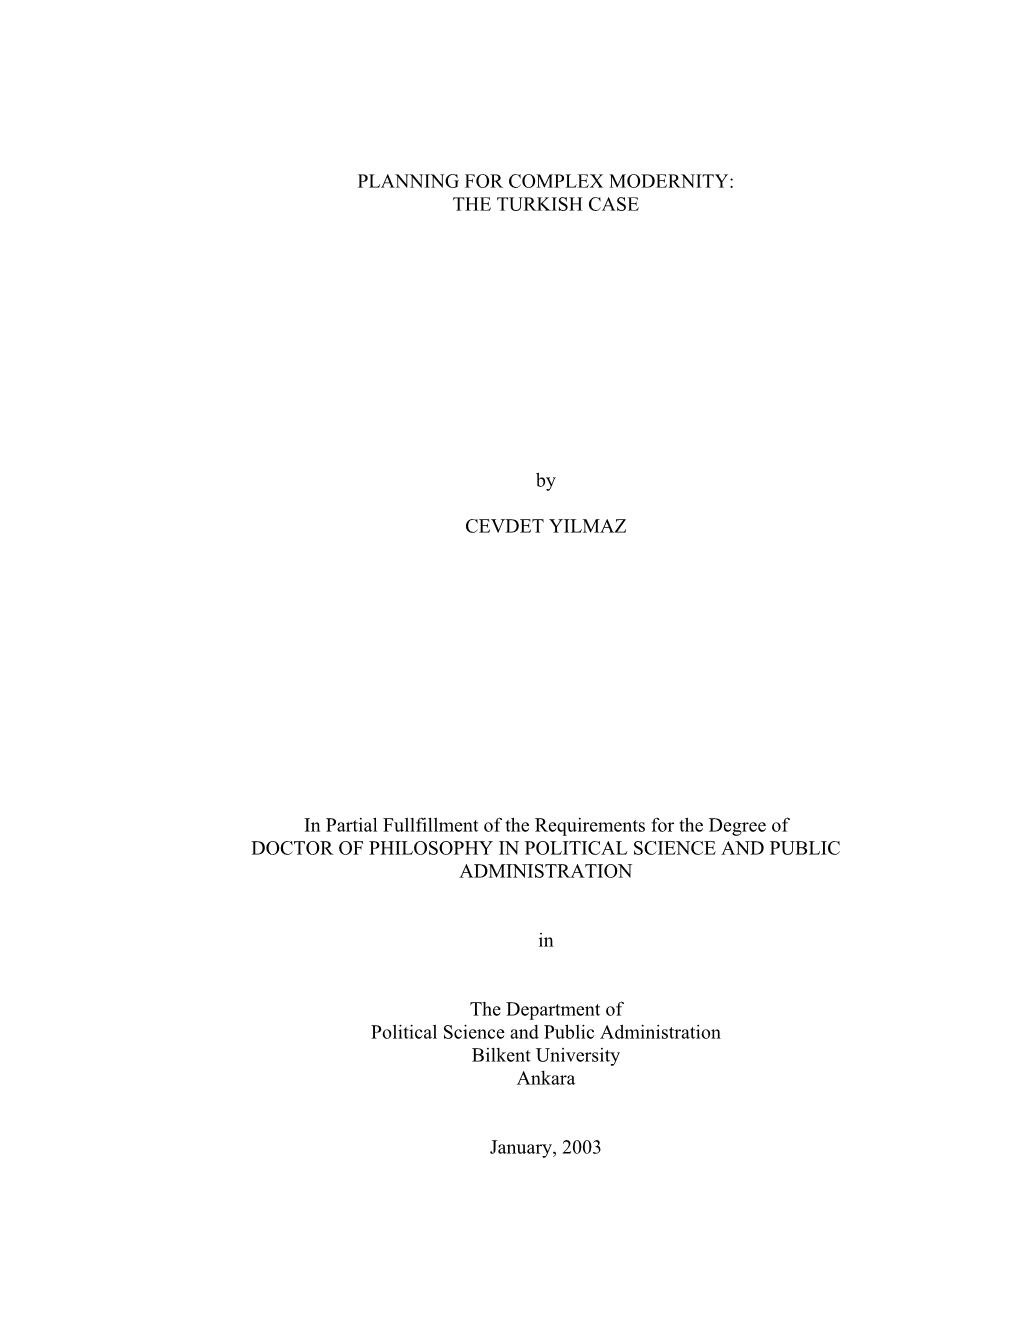 PLANNING for COMPLEX MODERNITY: the TURKISH CASE by CEVDET YILMAZ in Partial Fullfillment of the Requirements for the Degree Of